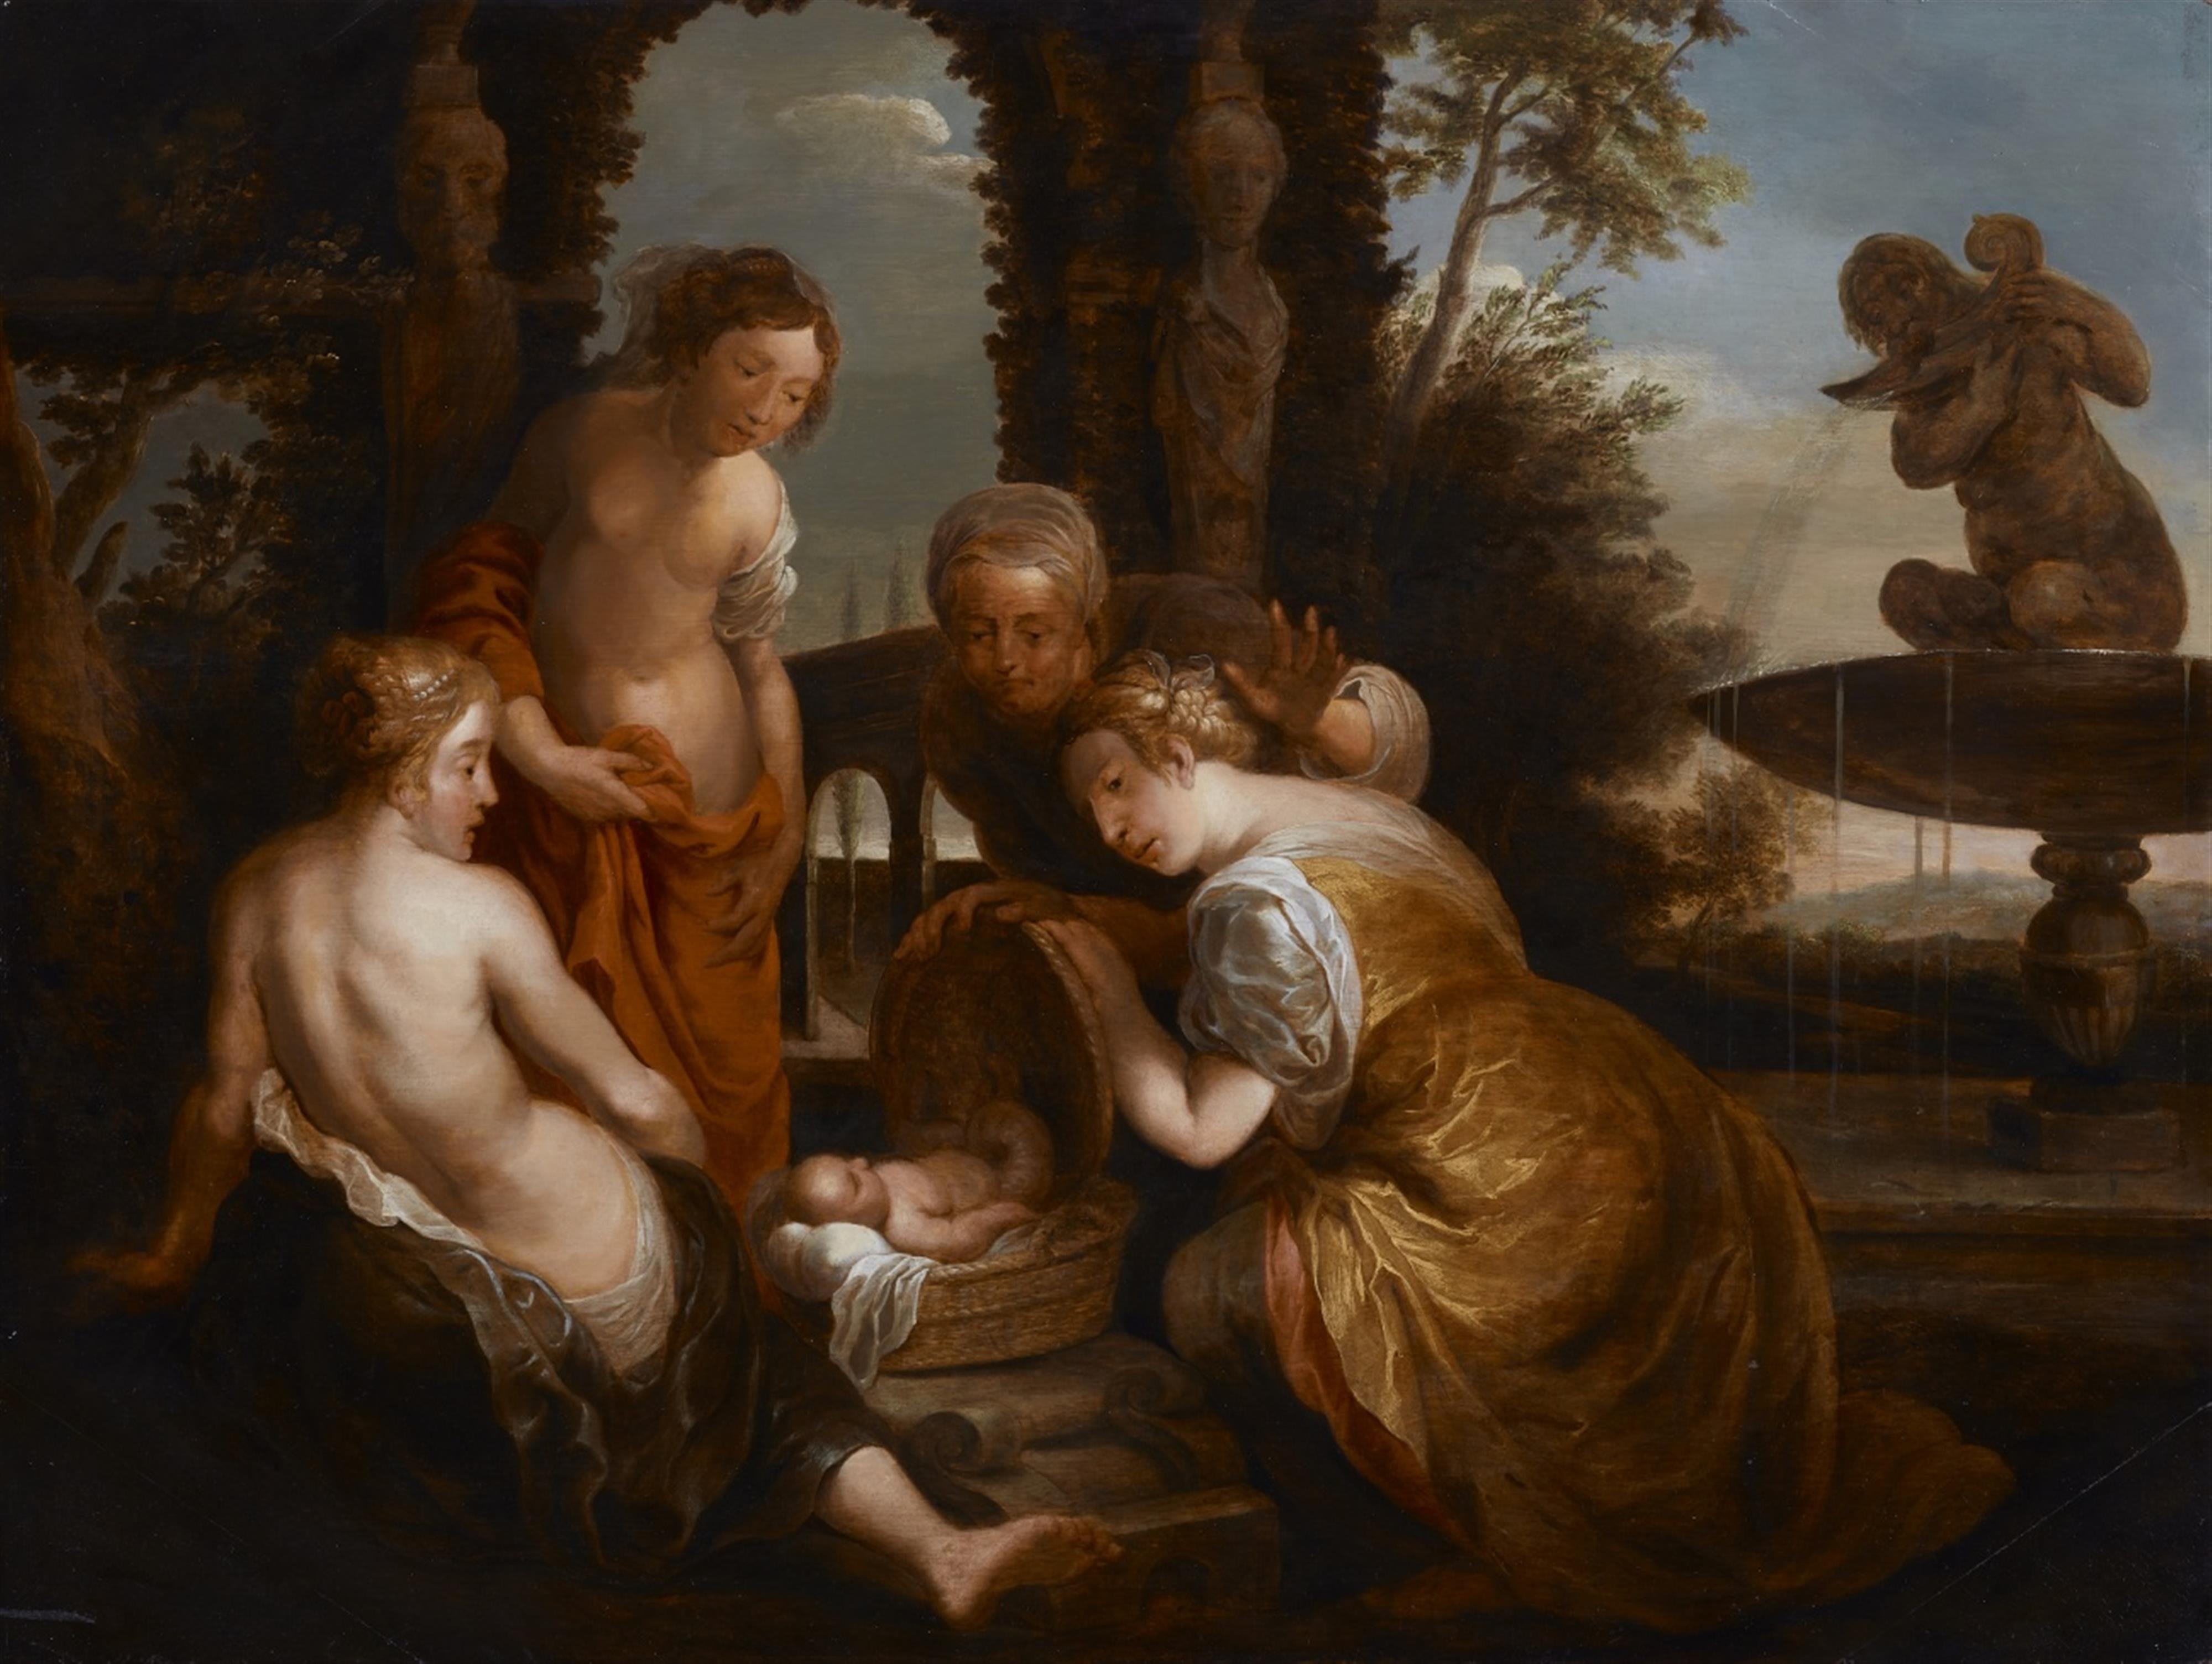 Peter Paul Rubens, follower of - The Finding of Erichthonius by the Daughters of Cecrops - image-1